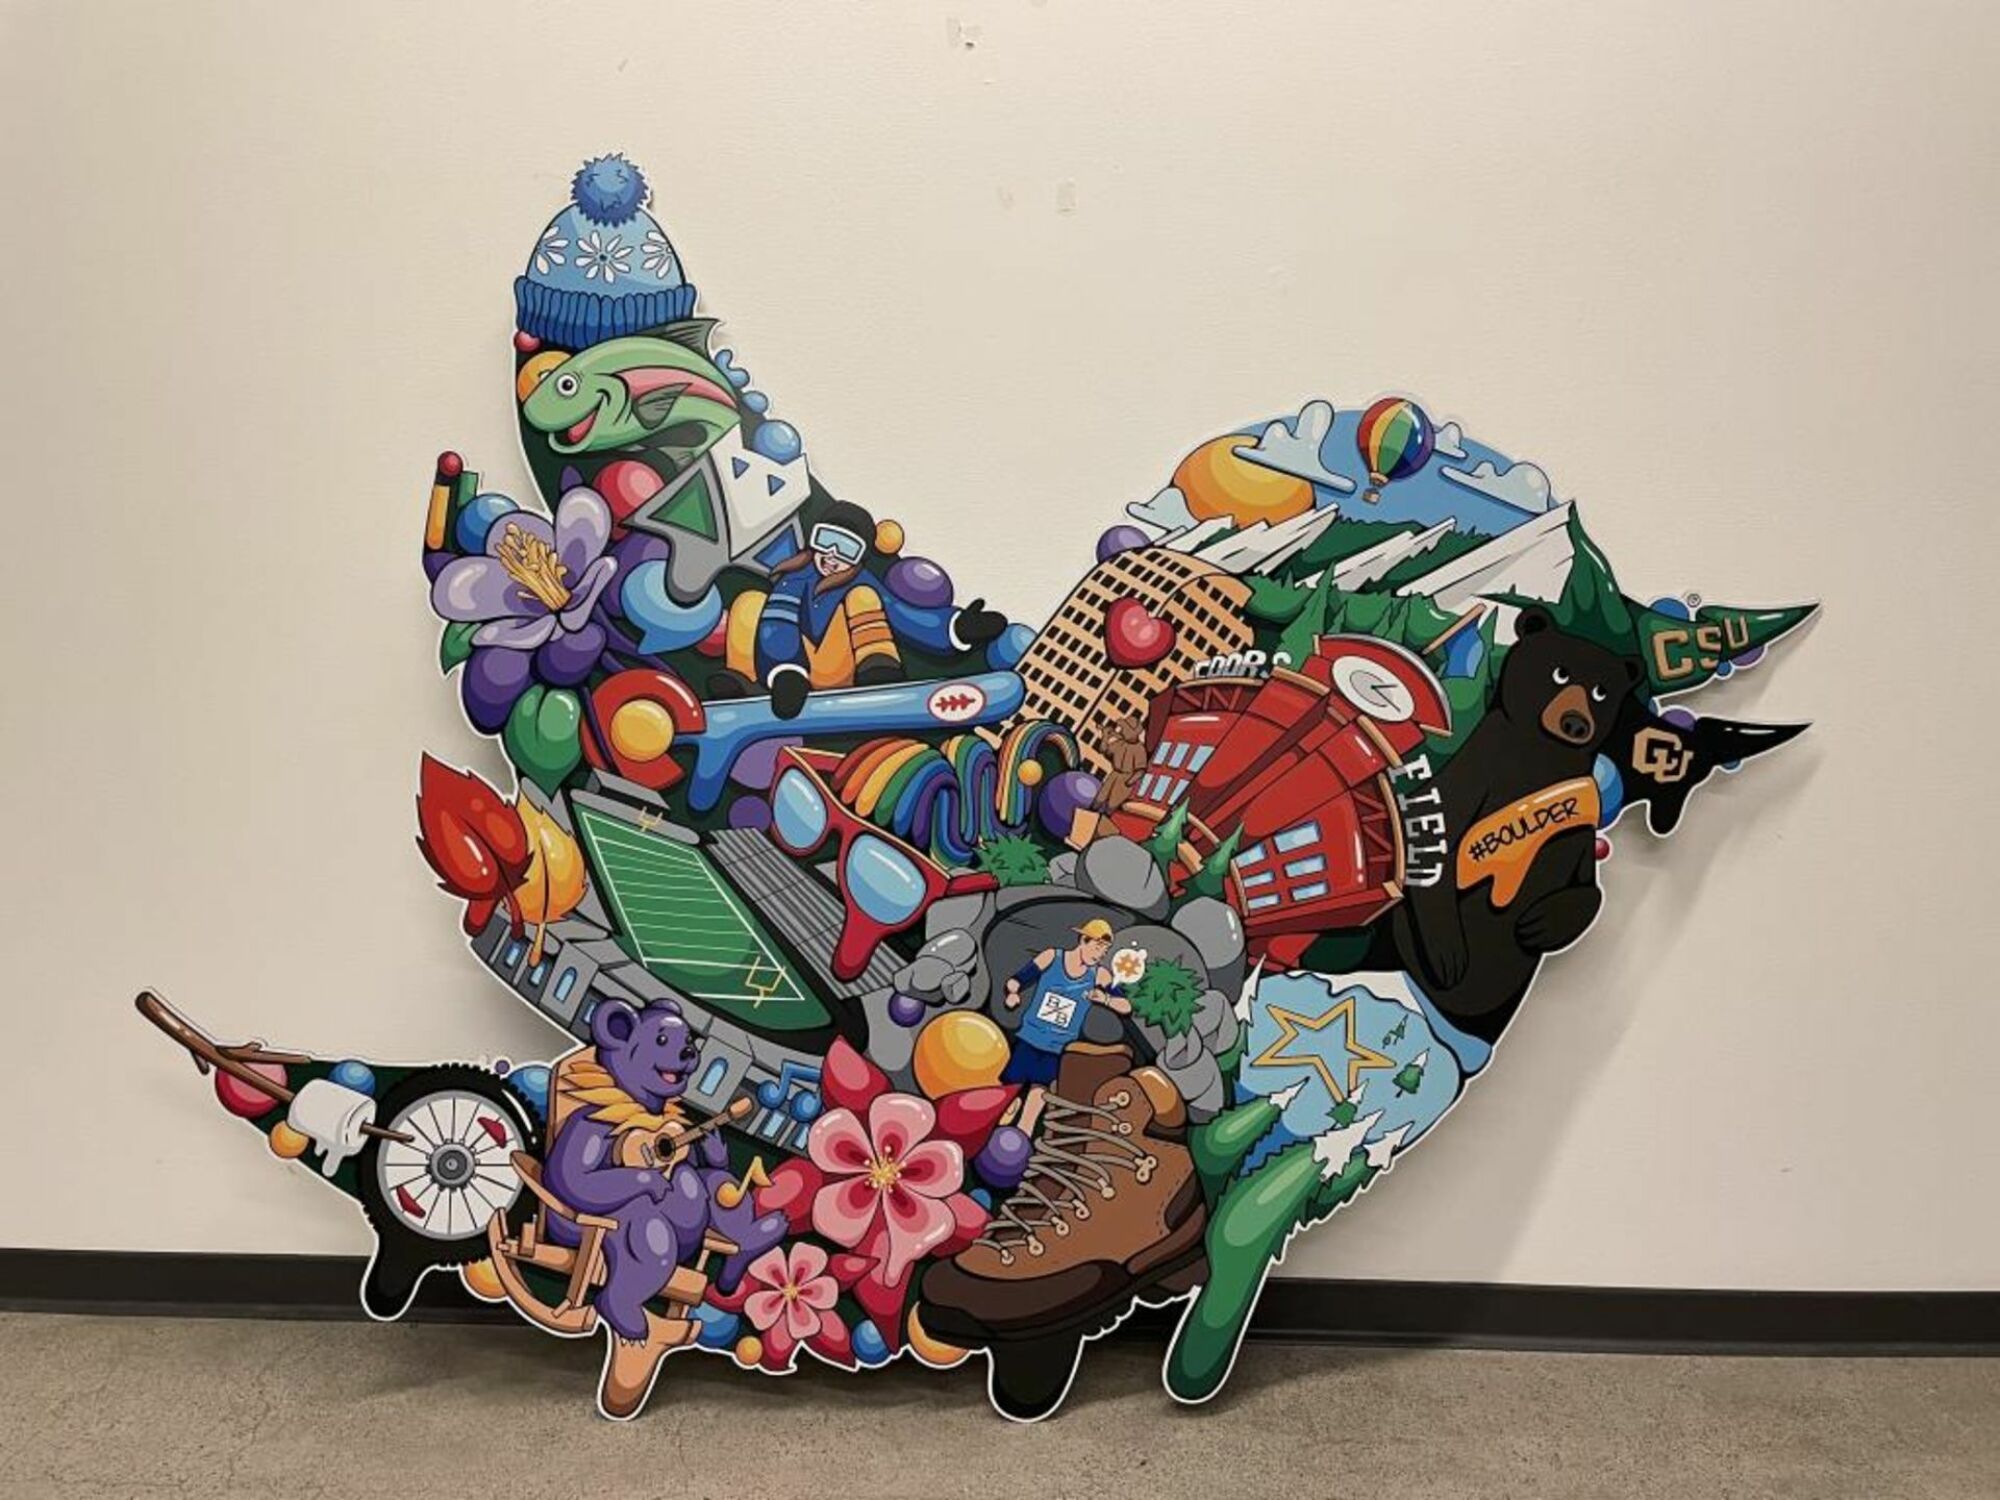 A colorful collage in the shape of the Twitter bird logo.